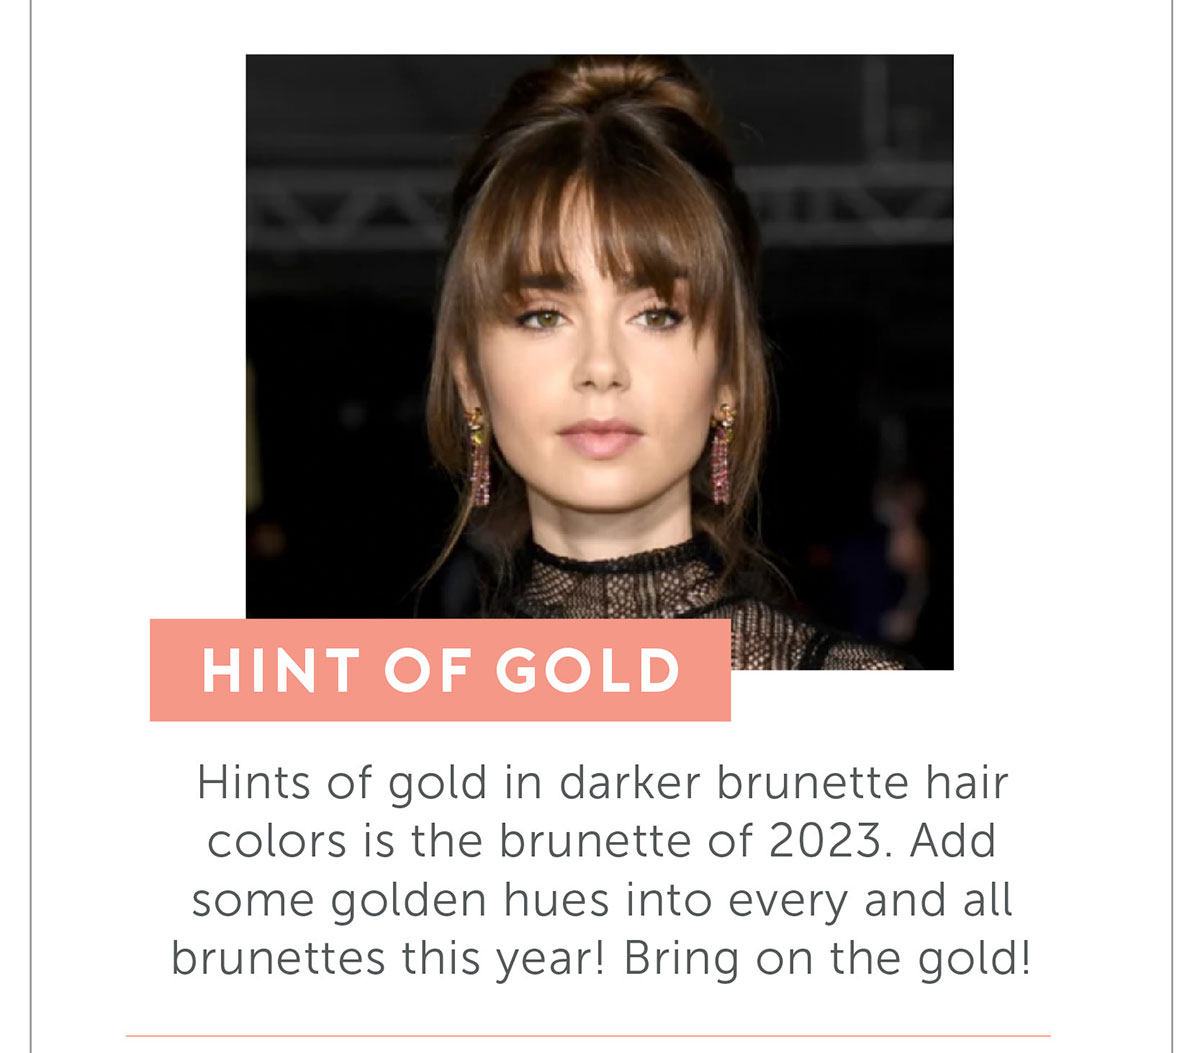 Hint of Gold. Hints of gold in darker brunette hair colors is the brunette of 2023. Add some golden hues into every and all brunettes this year! Bring on the gold!